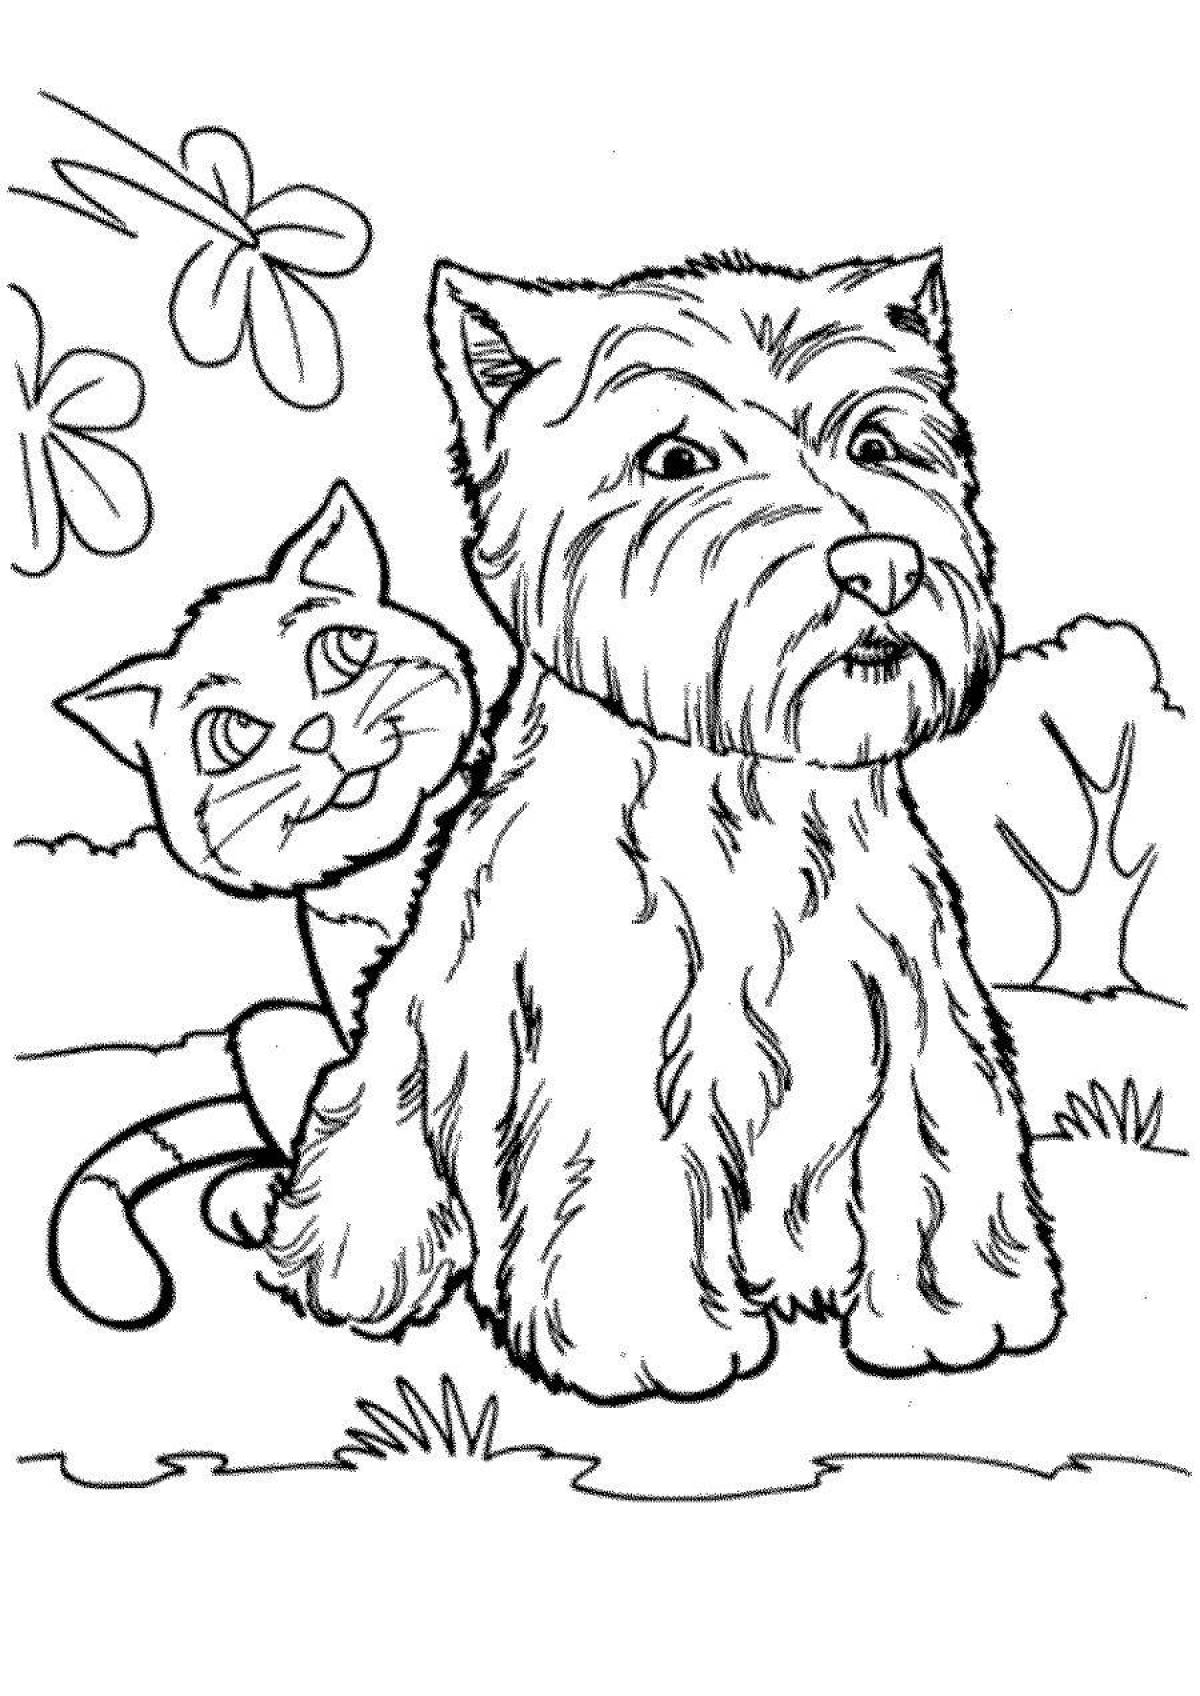 Glitter cat and dog coloring page